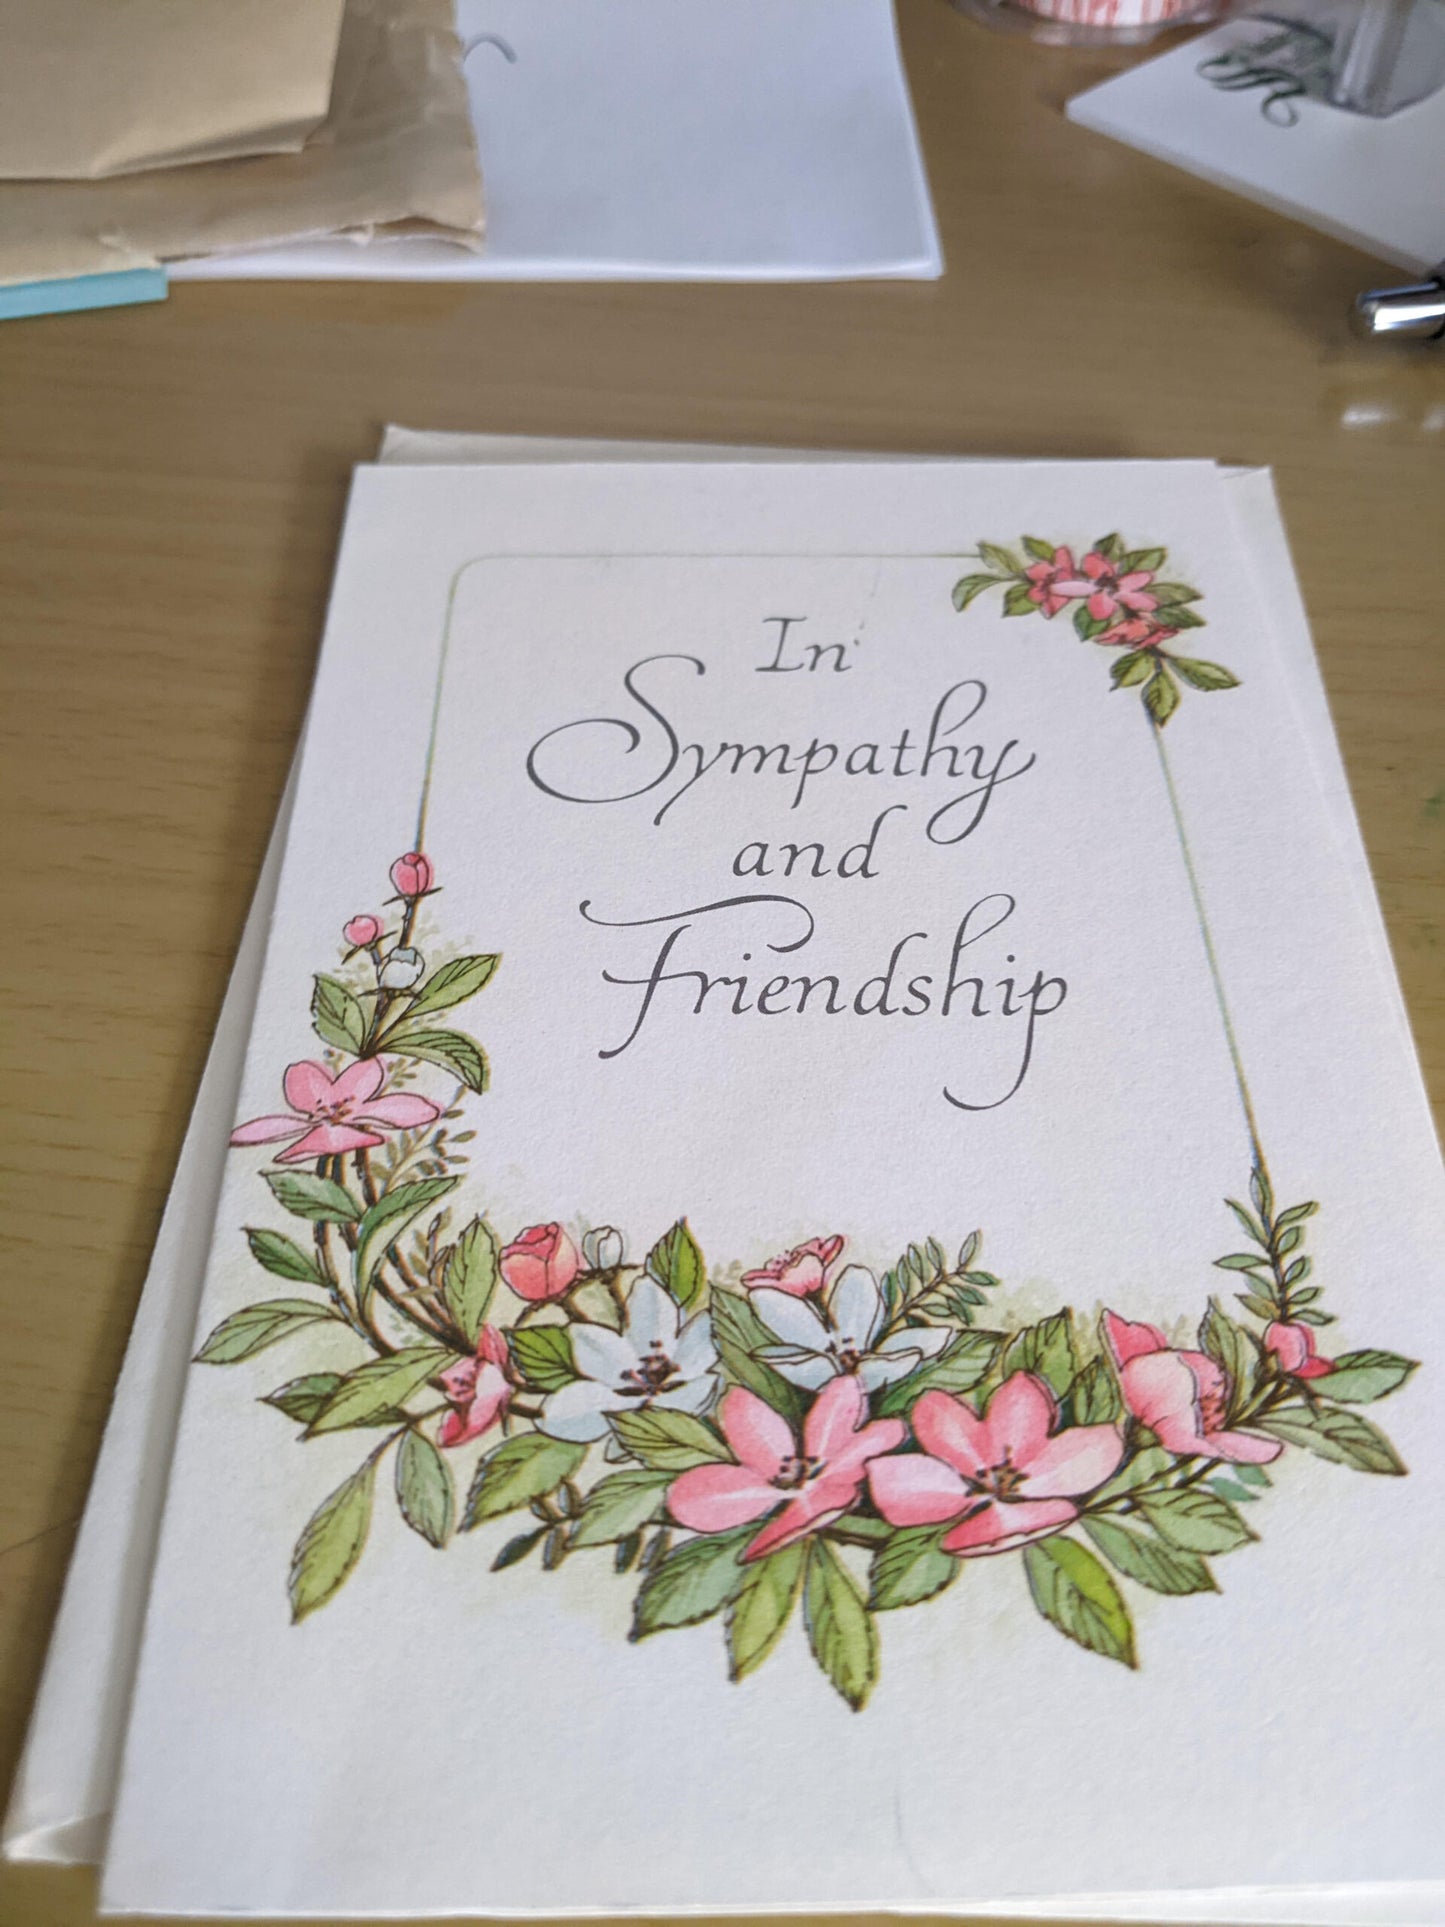 In Sympathy and Friendship